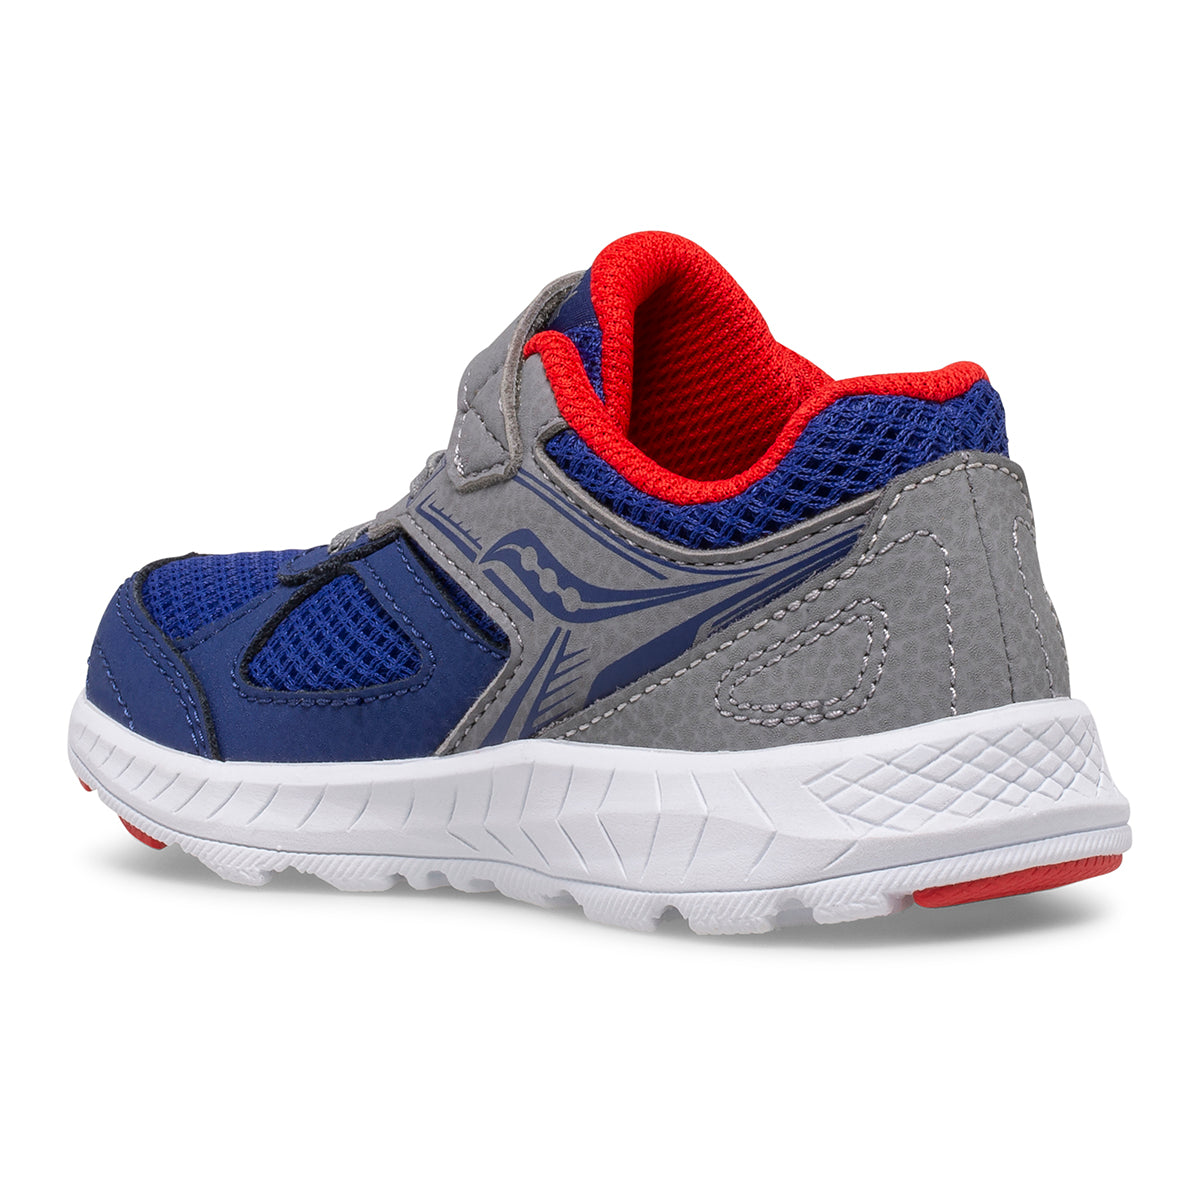 cohesion-14-ac-jr-sneaker-littlekid-navy-red__Navy/Red_2